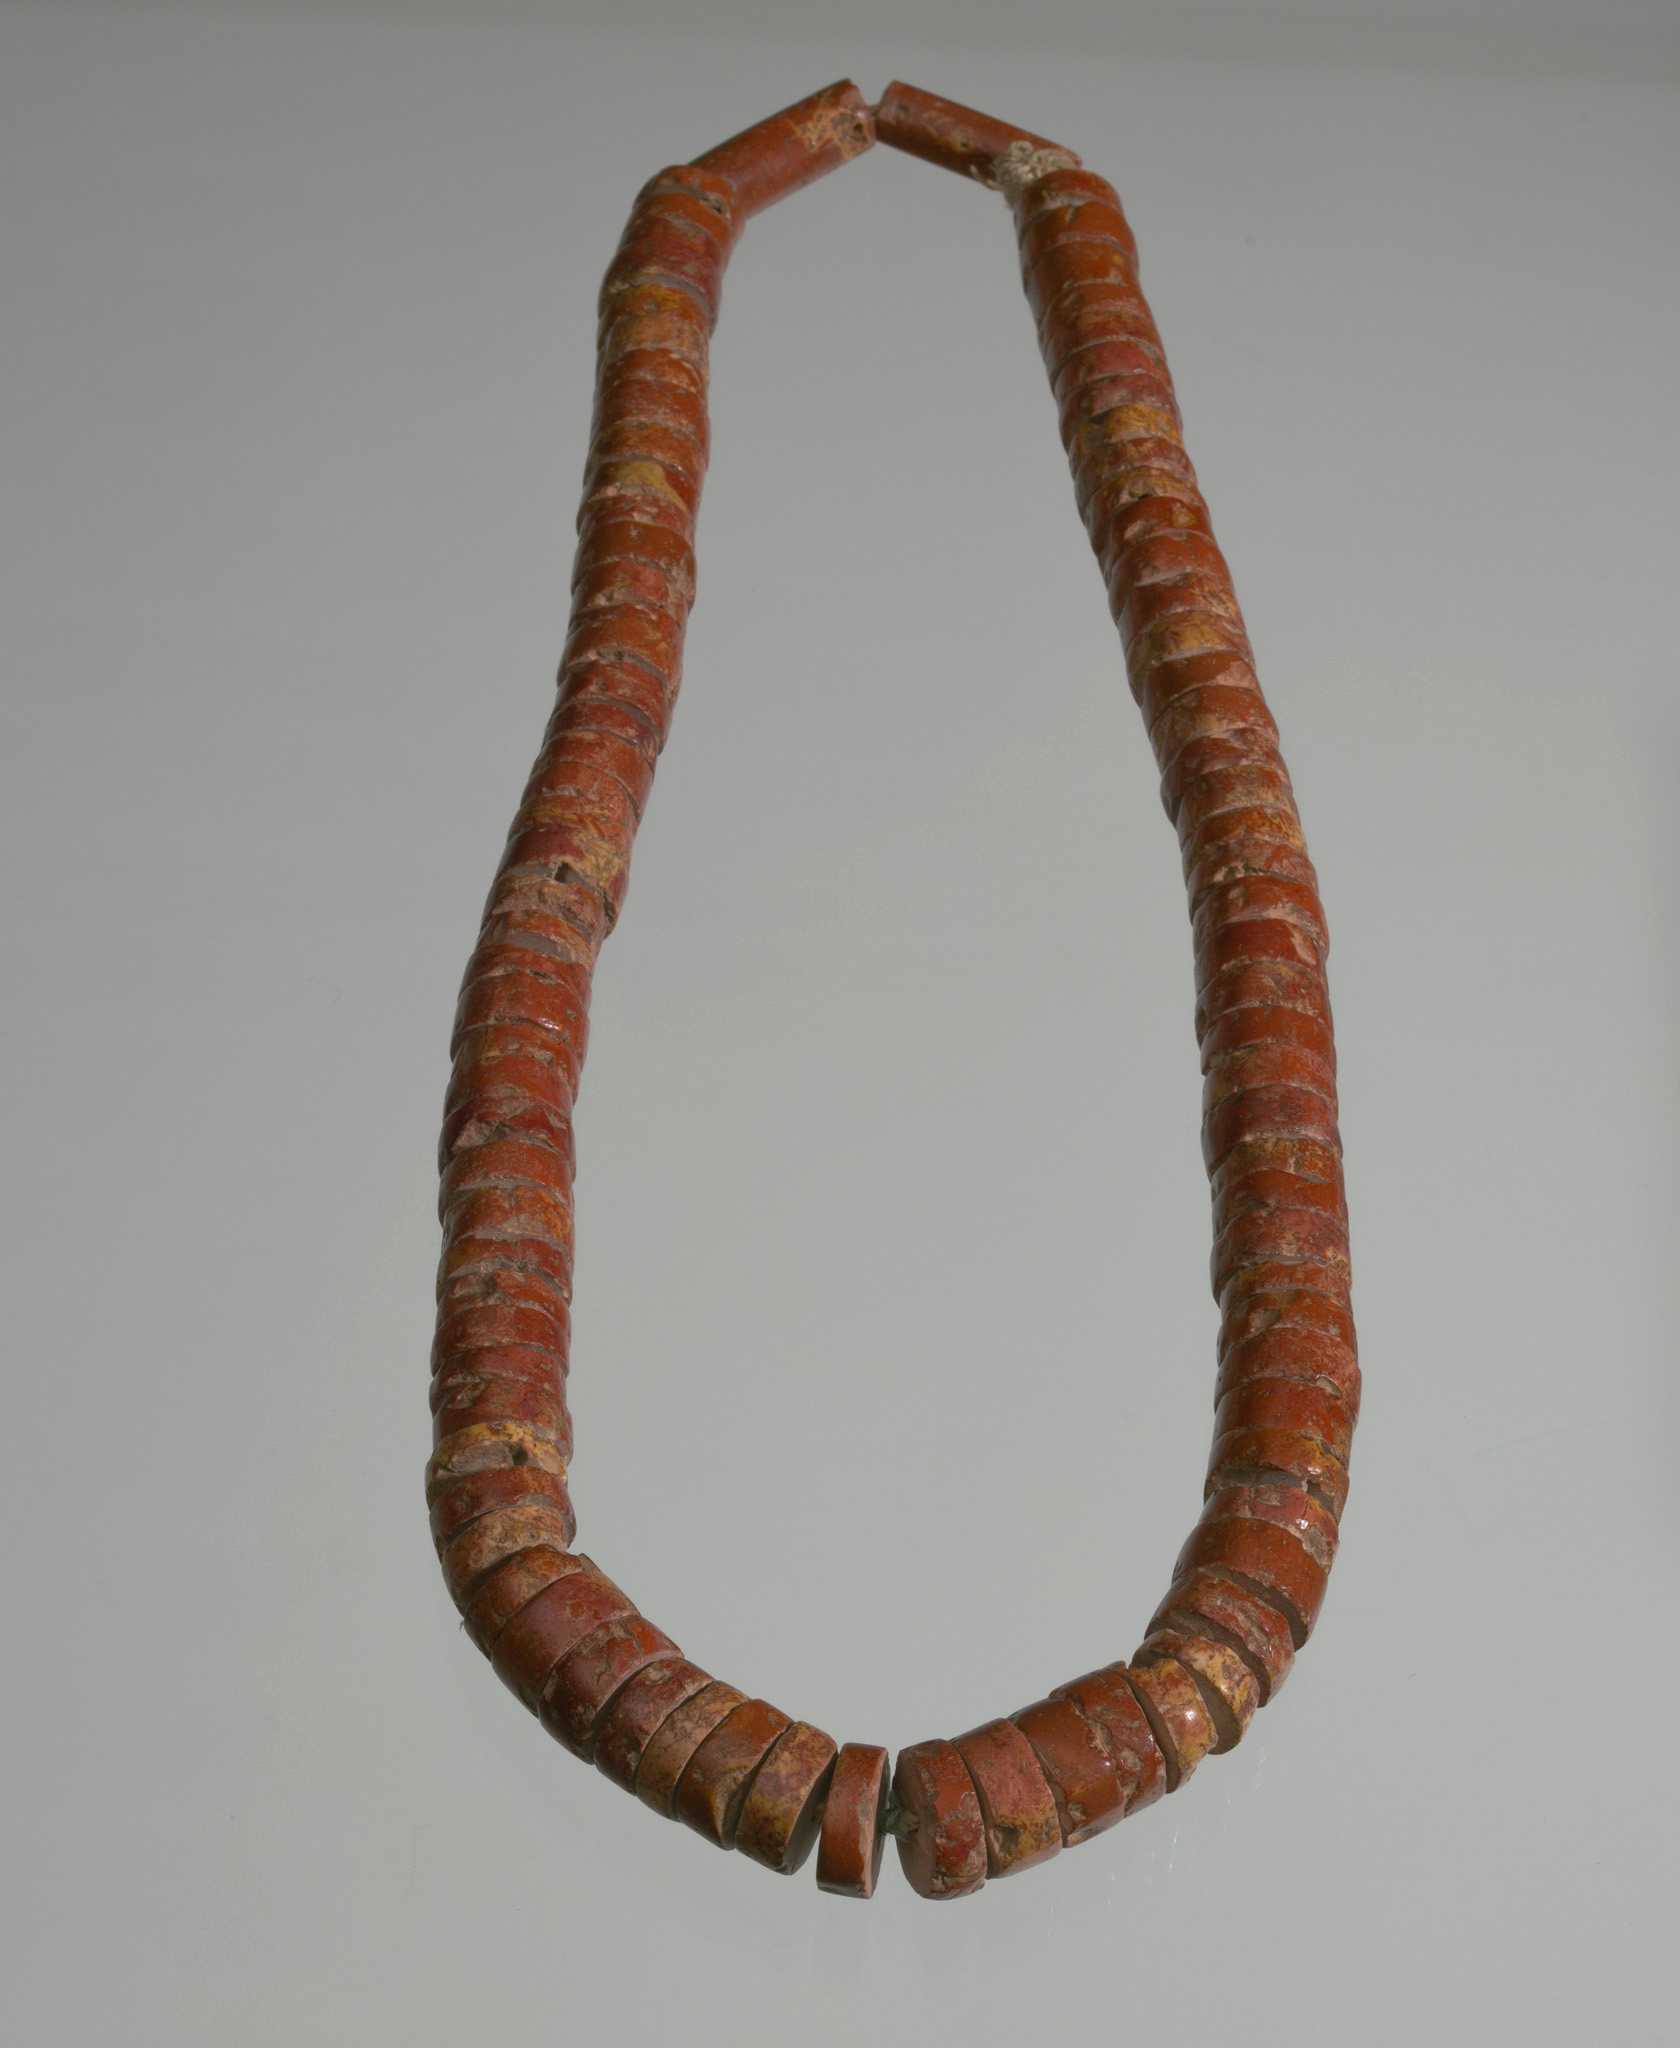 Strand of red colored beads